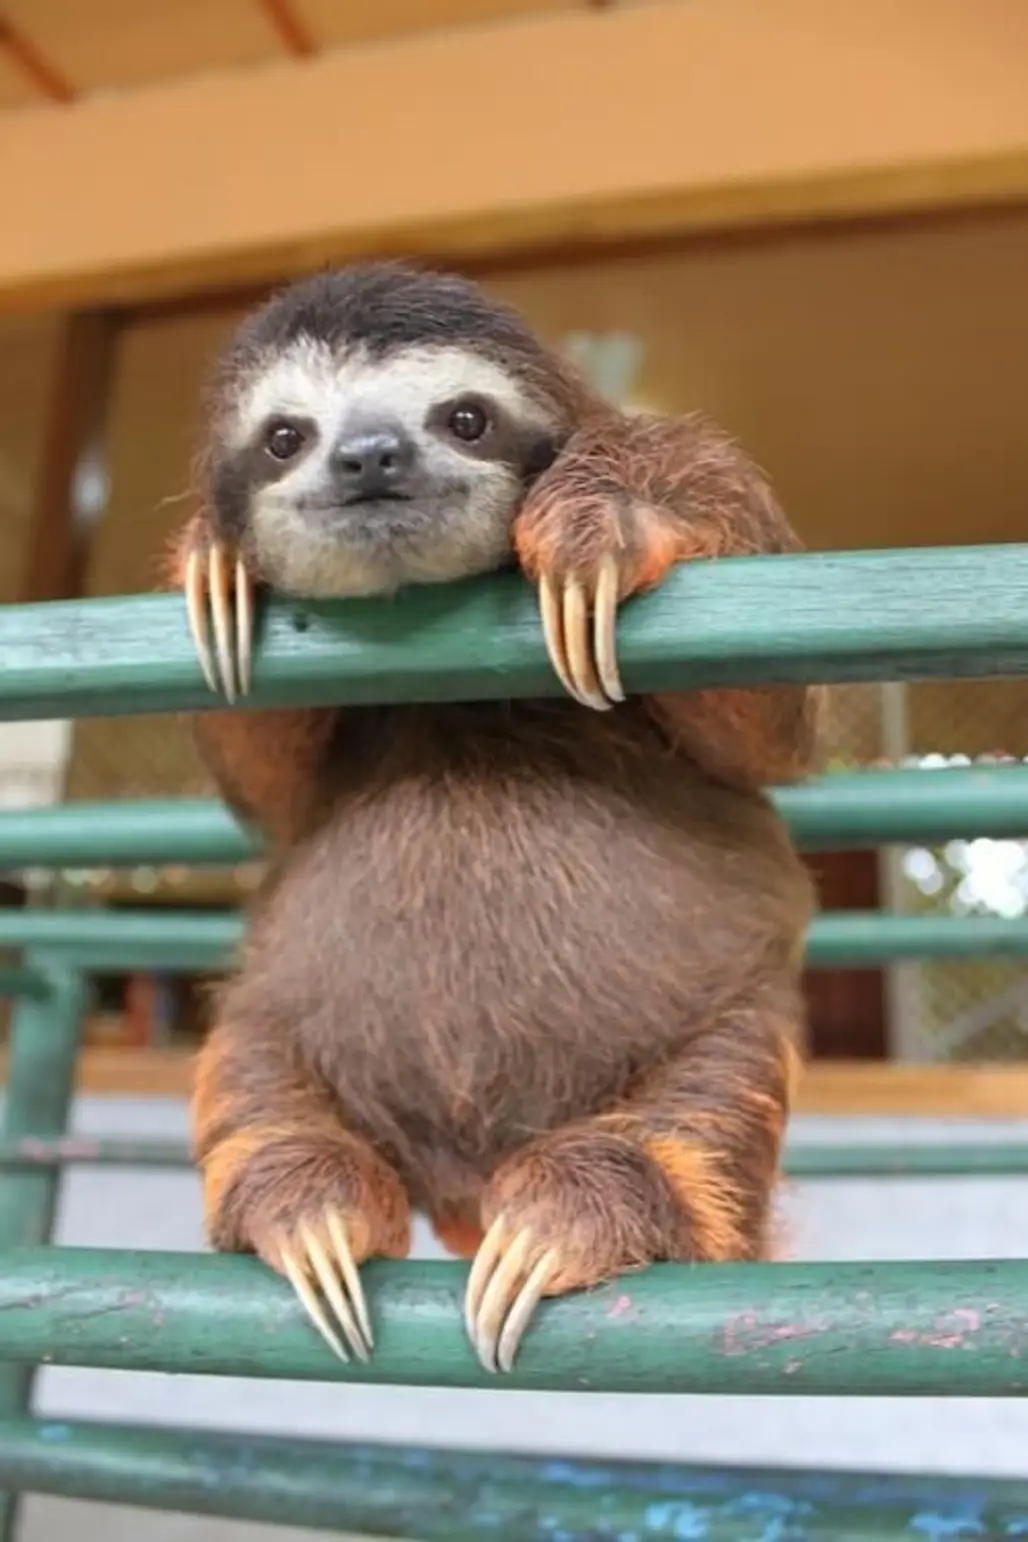 "I'm a Three-toed Sloth. I'll Spend My Life Hangin' around so I Might as Well Start Early"